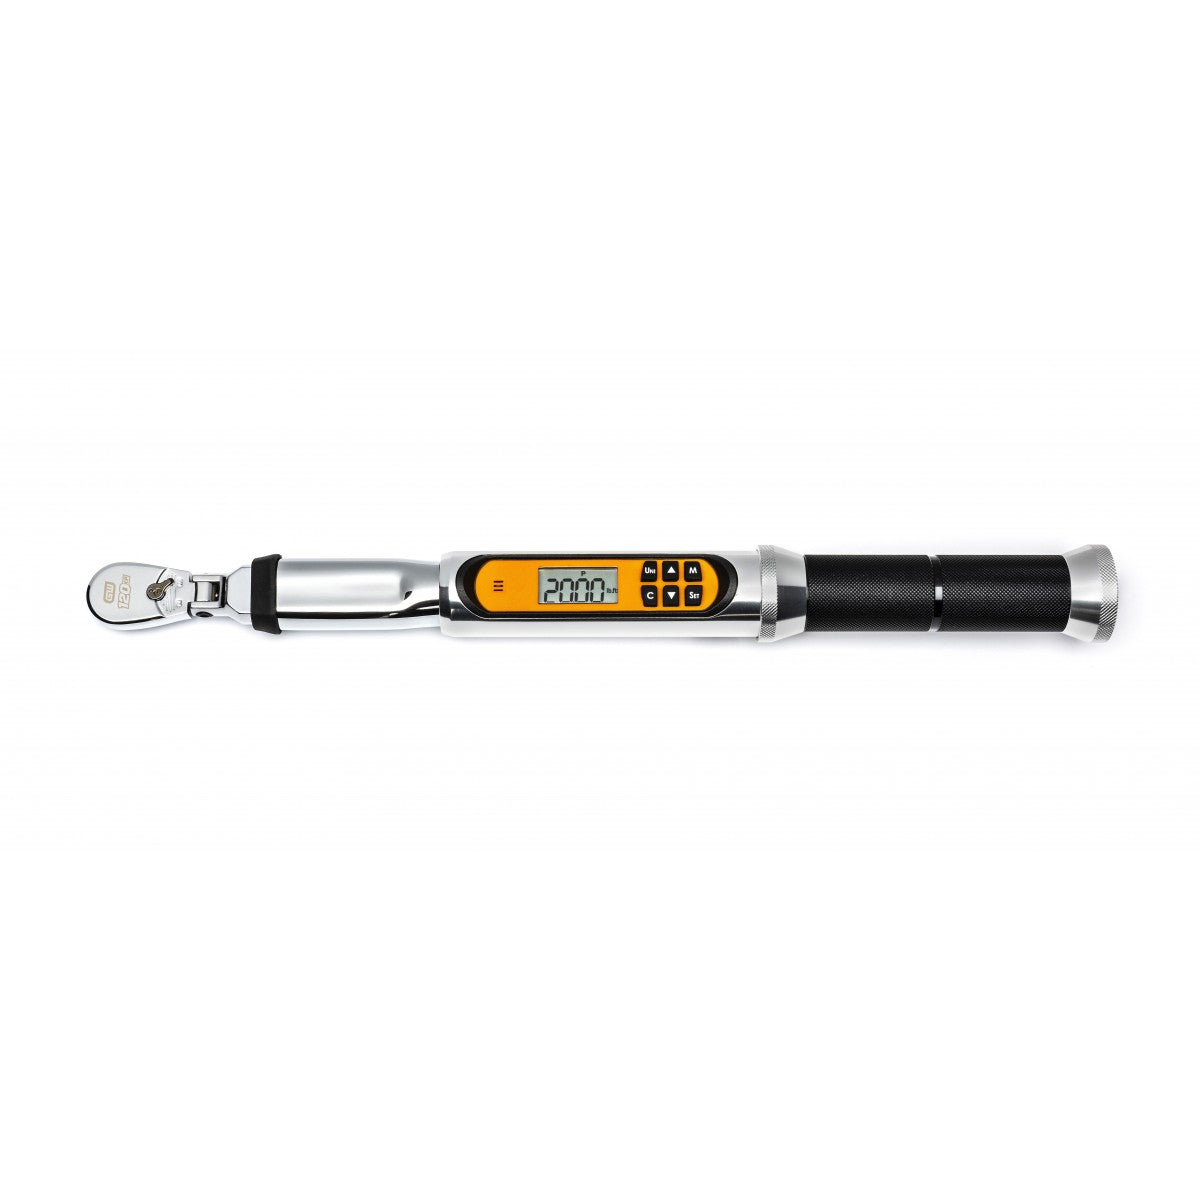 1/4" 120XP Flex Head Electronic Torque Wrench With Angle 85194 by Gearwrench